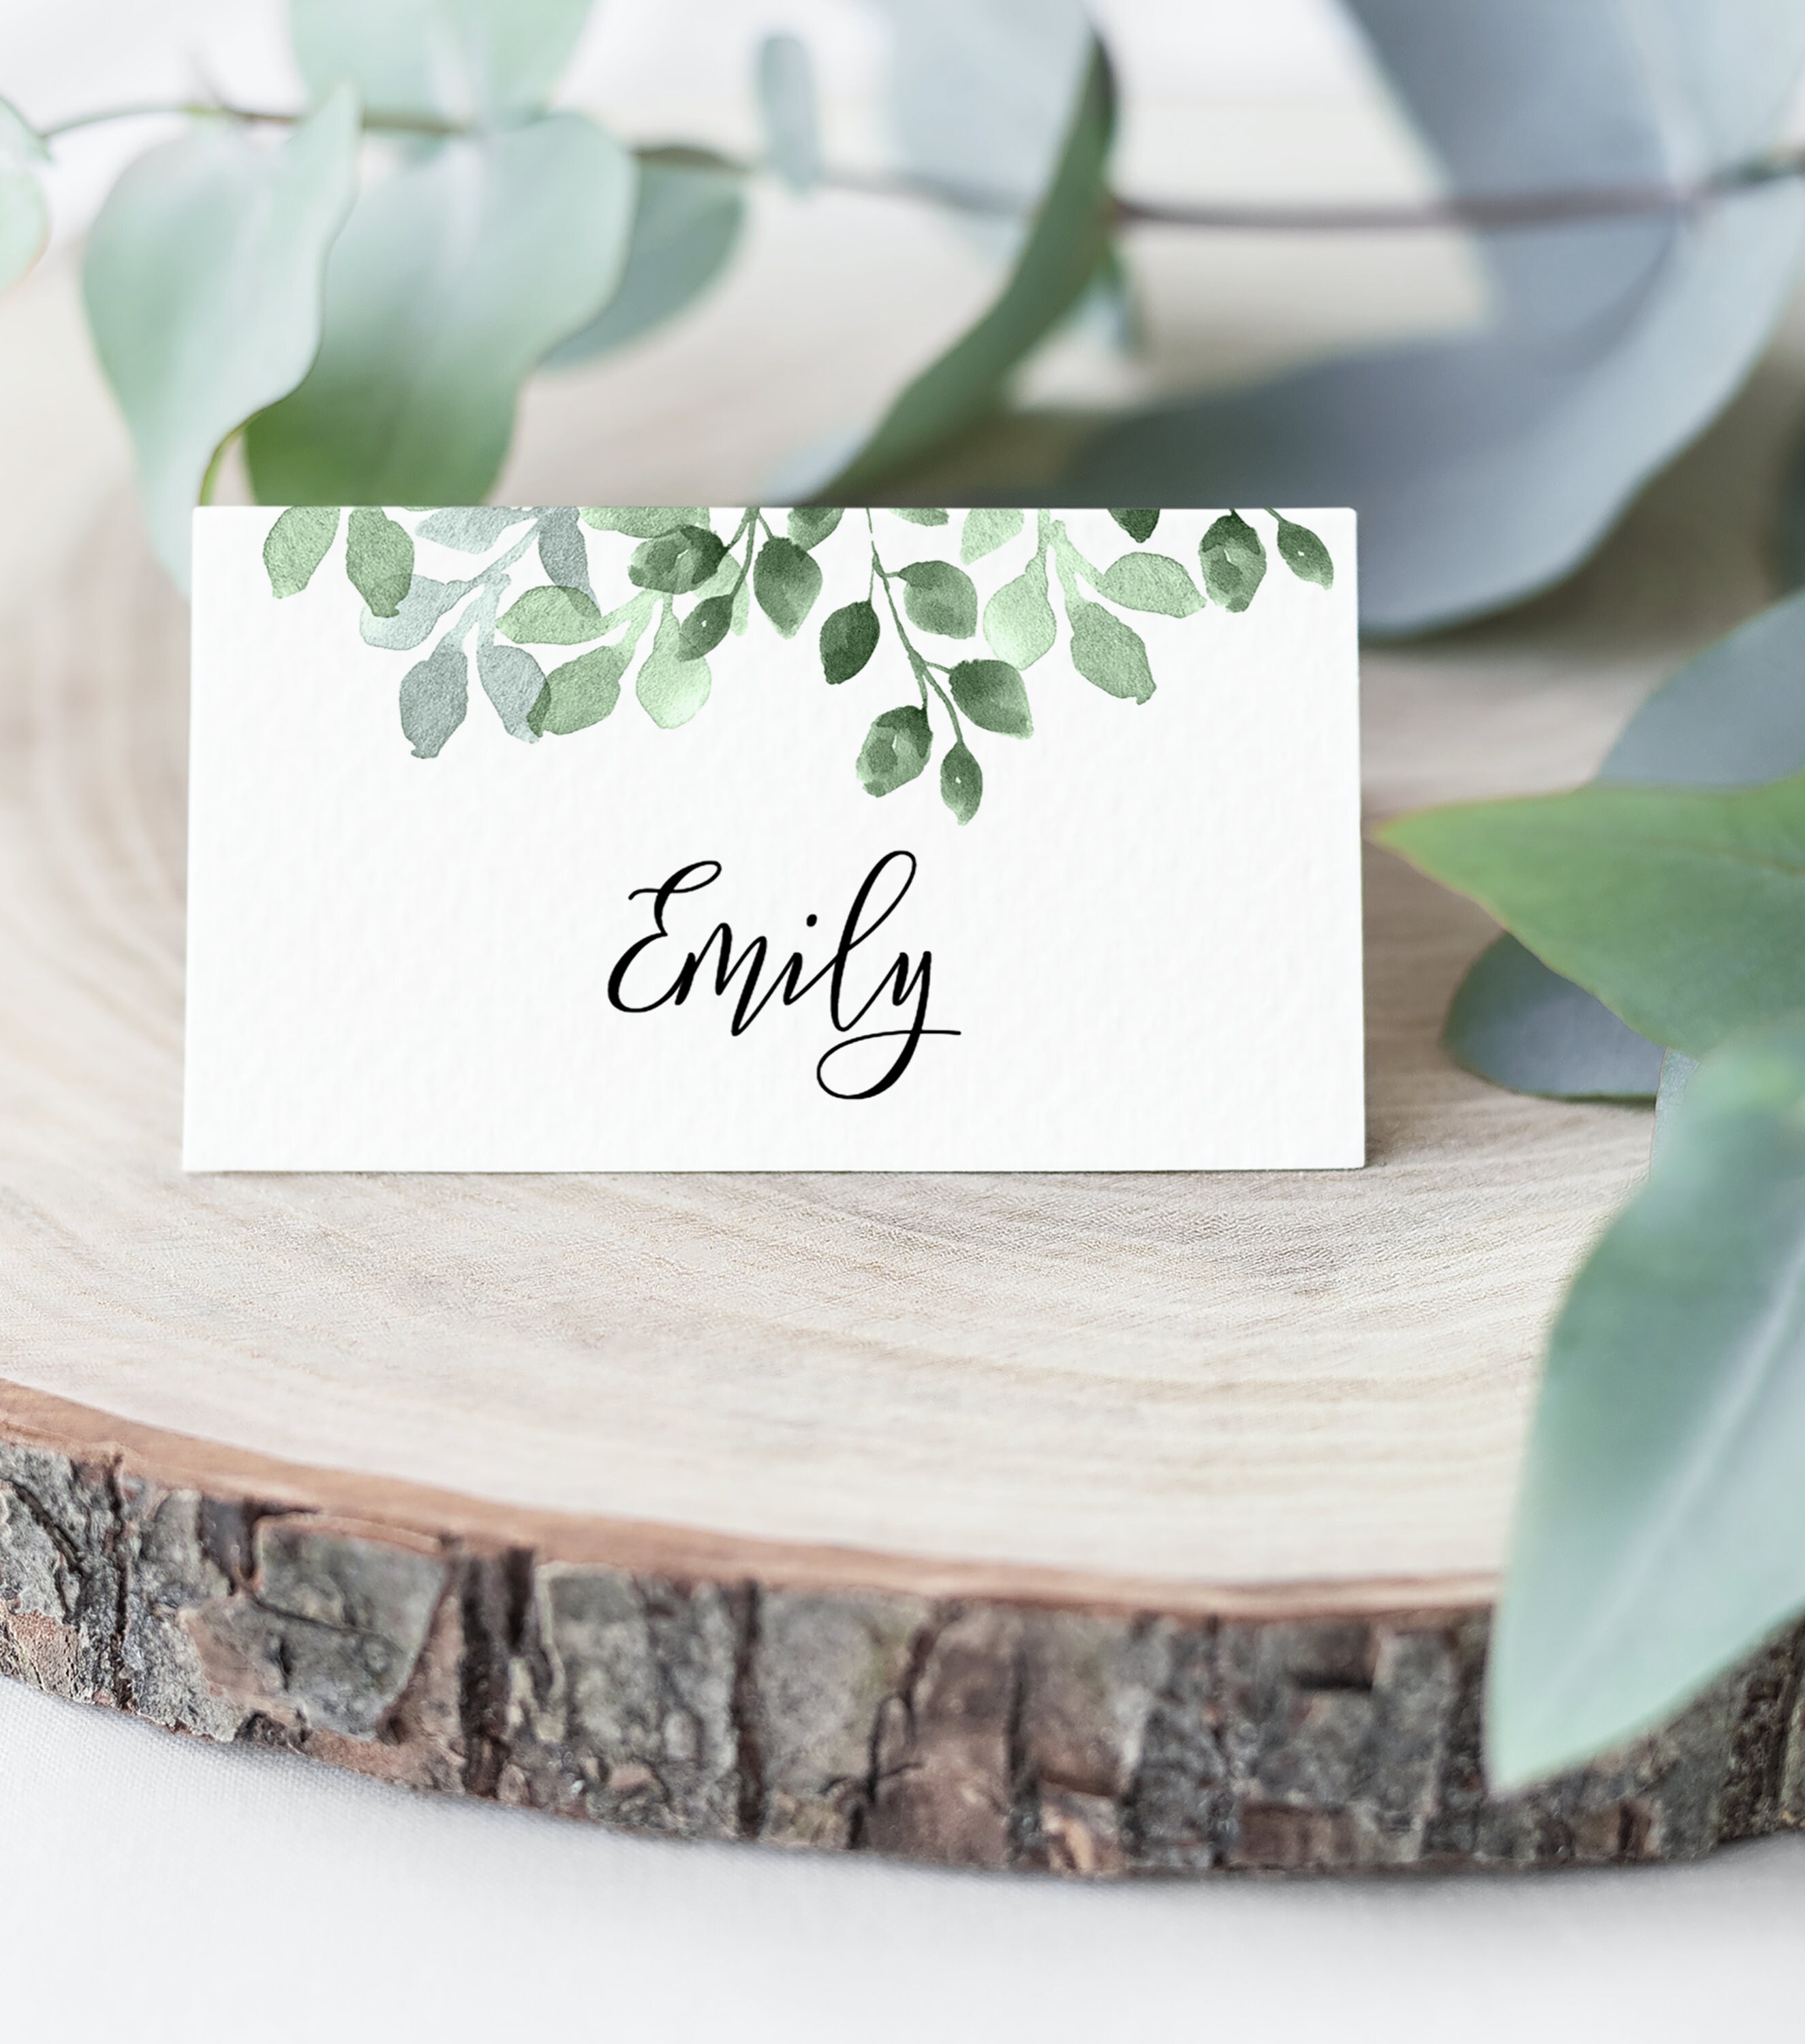 Guest Names Place Settings Wedding Names Eucalyptus Wedding Place Cards Name Cards